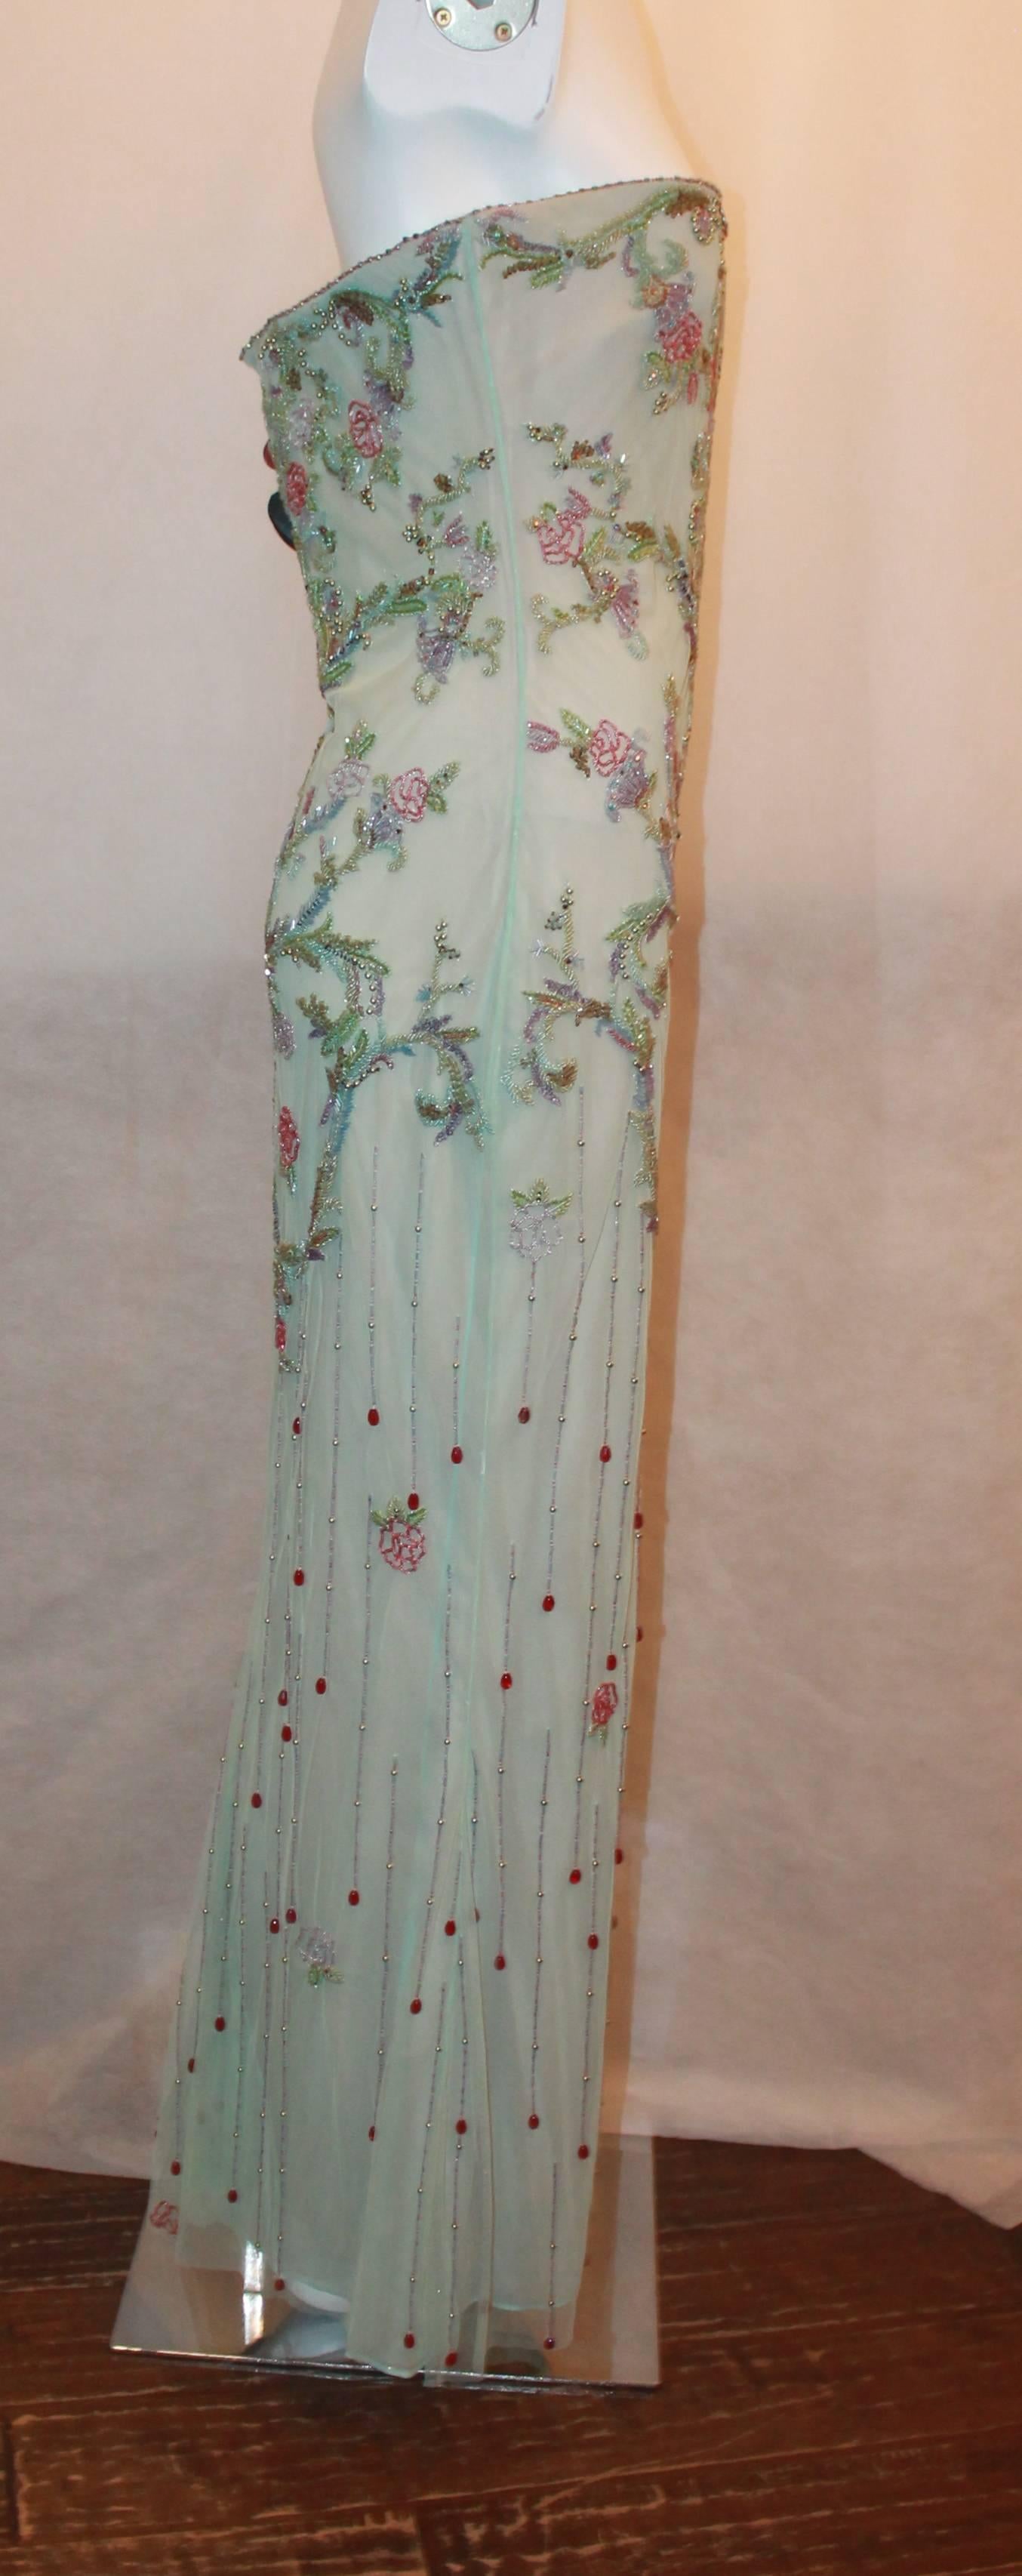 Reem Acra Art Deco Aqua and Multi Floral Silk Blend Beaded Gown - 10.  This gorgeous gown is in very good condition with only some minor sections with beading coming off.  It features beautiful floral beading with beading also along the trim on the